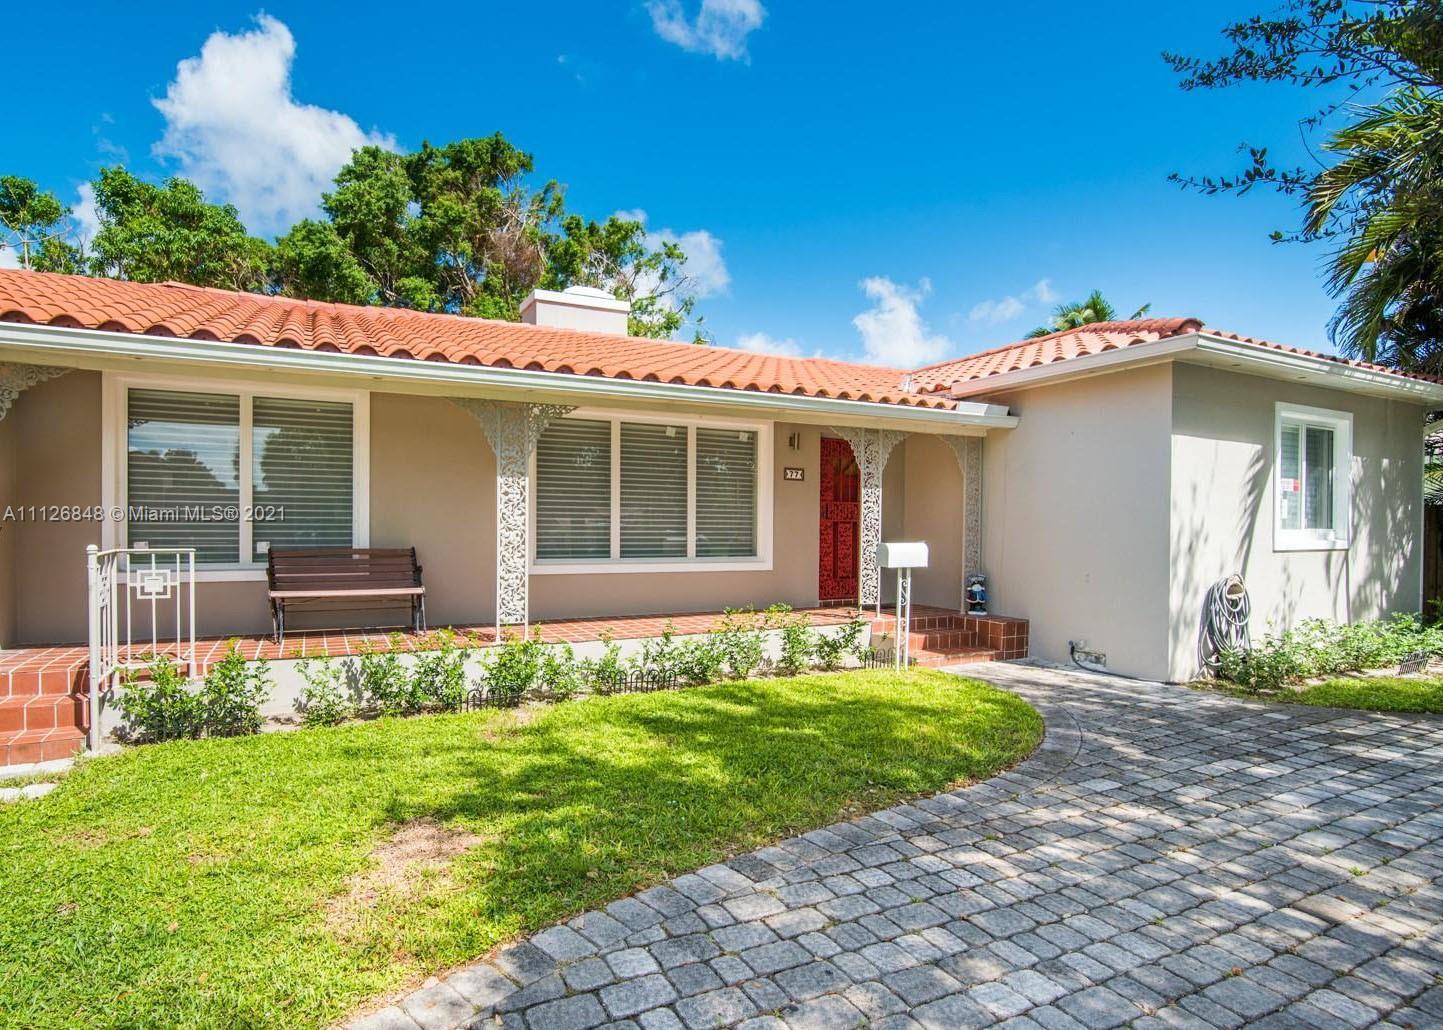 Immaculate, professionally-designed 1 story home in beautiful Miami Shores. With 3 bedrooms, 3 bathr